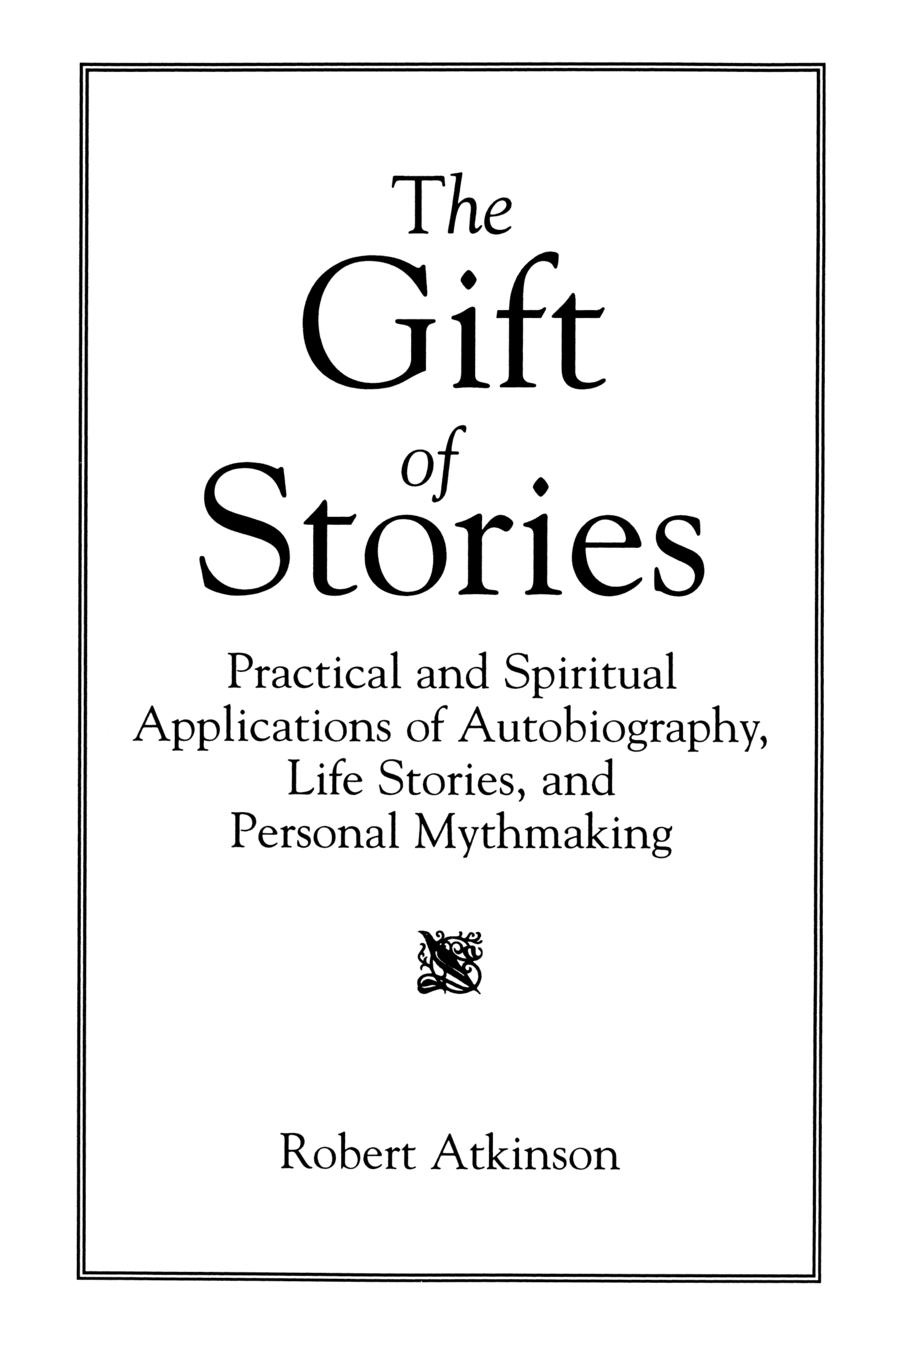 The Gift of Stories. Practical and Spiritual Applications of Autobiography, Life Stories, and Personal Mythmaking